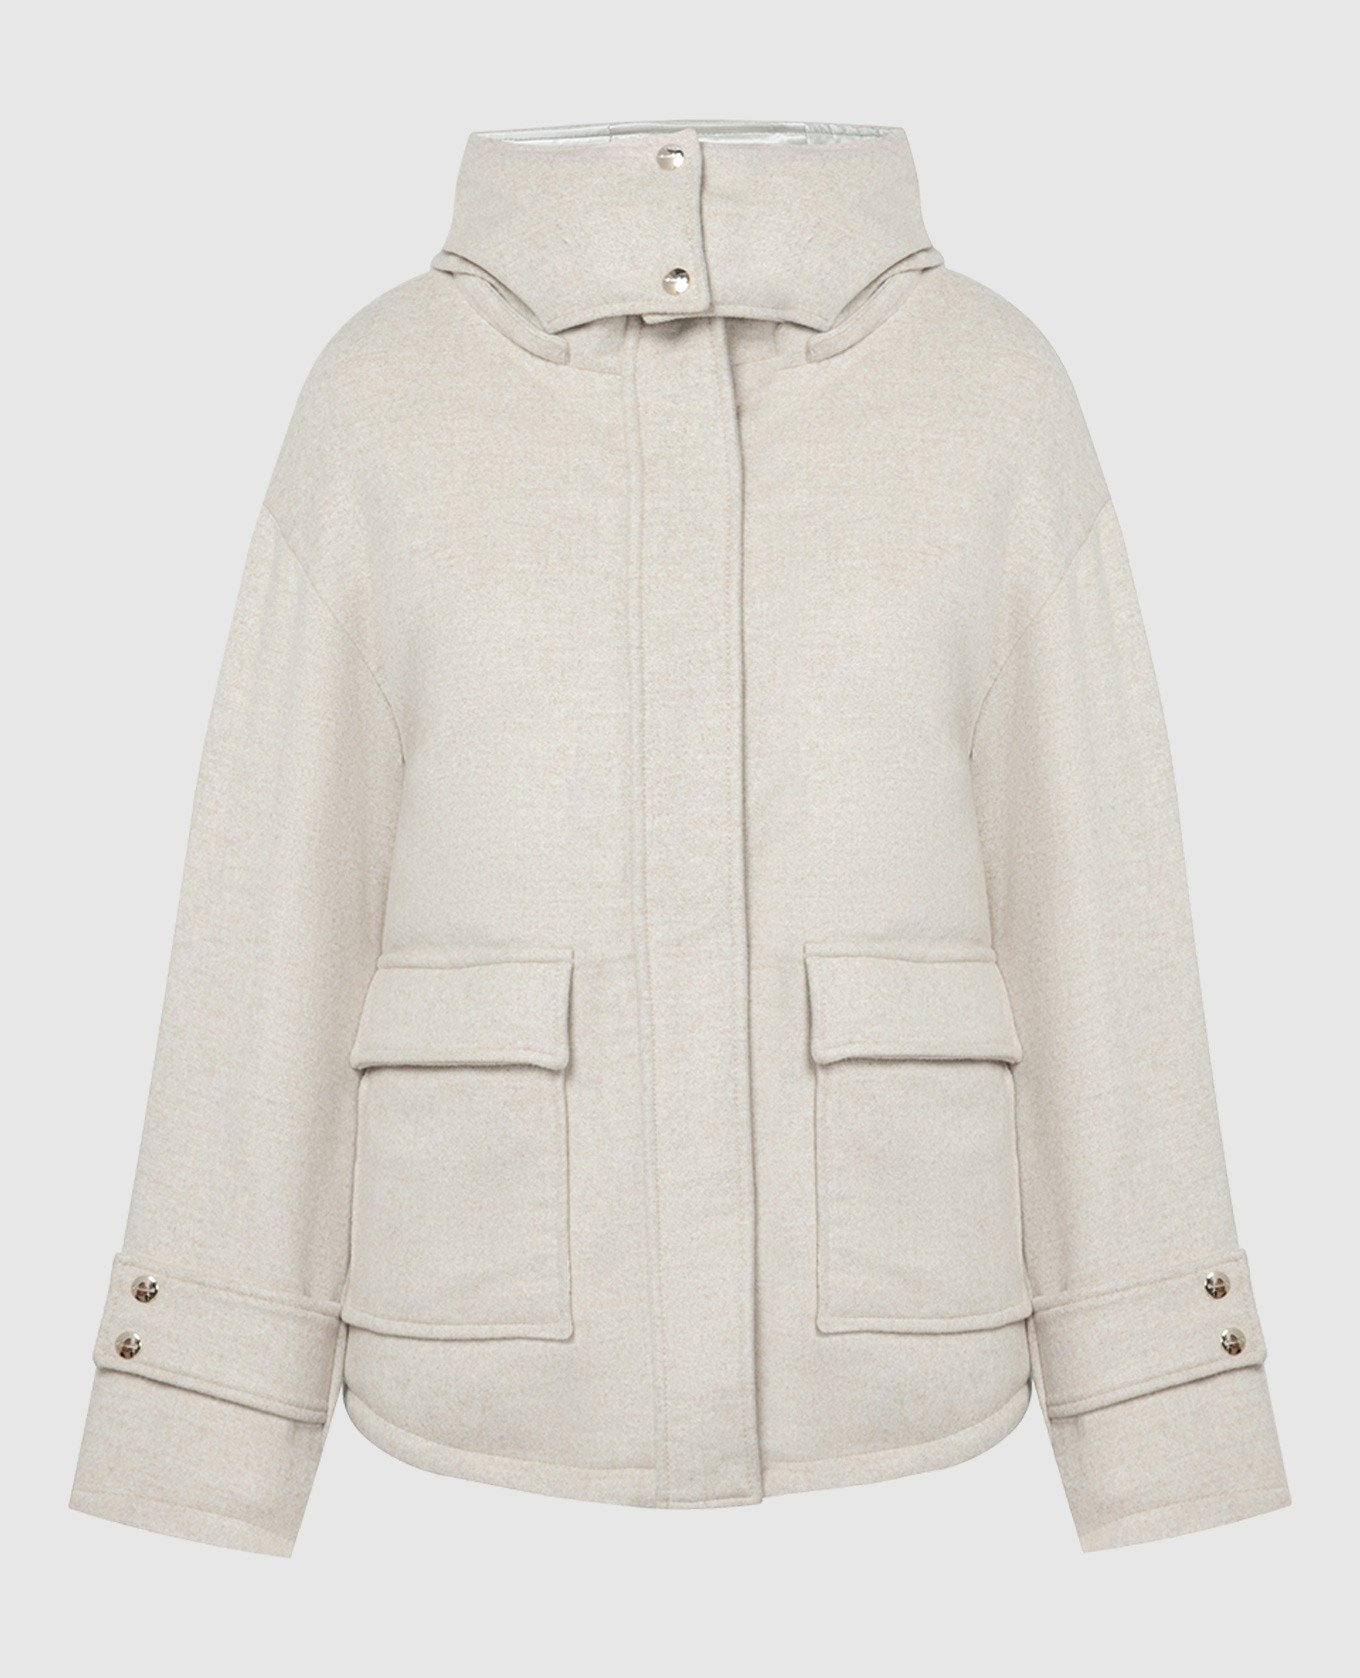 Beige down jacket made of wool and cashmere